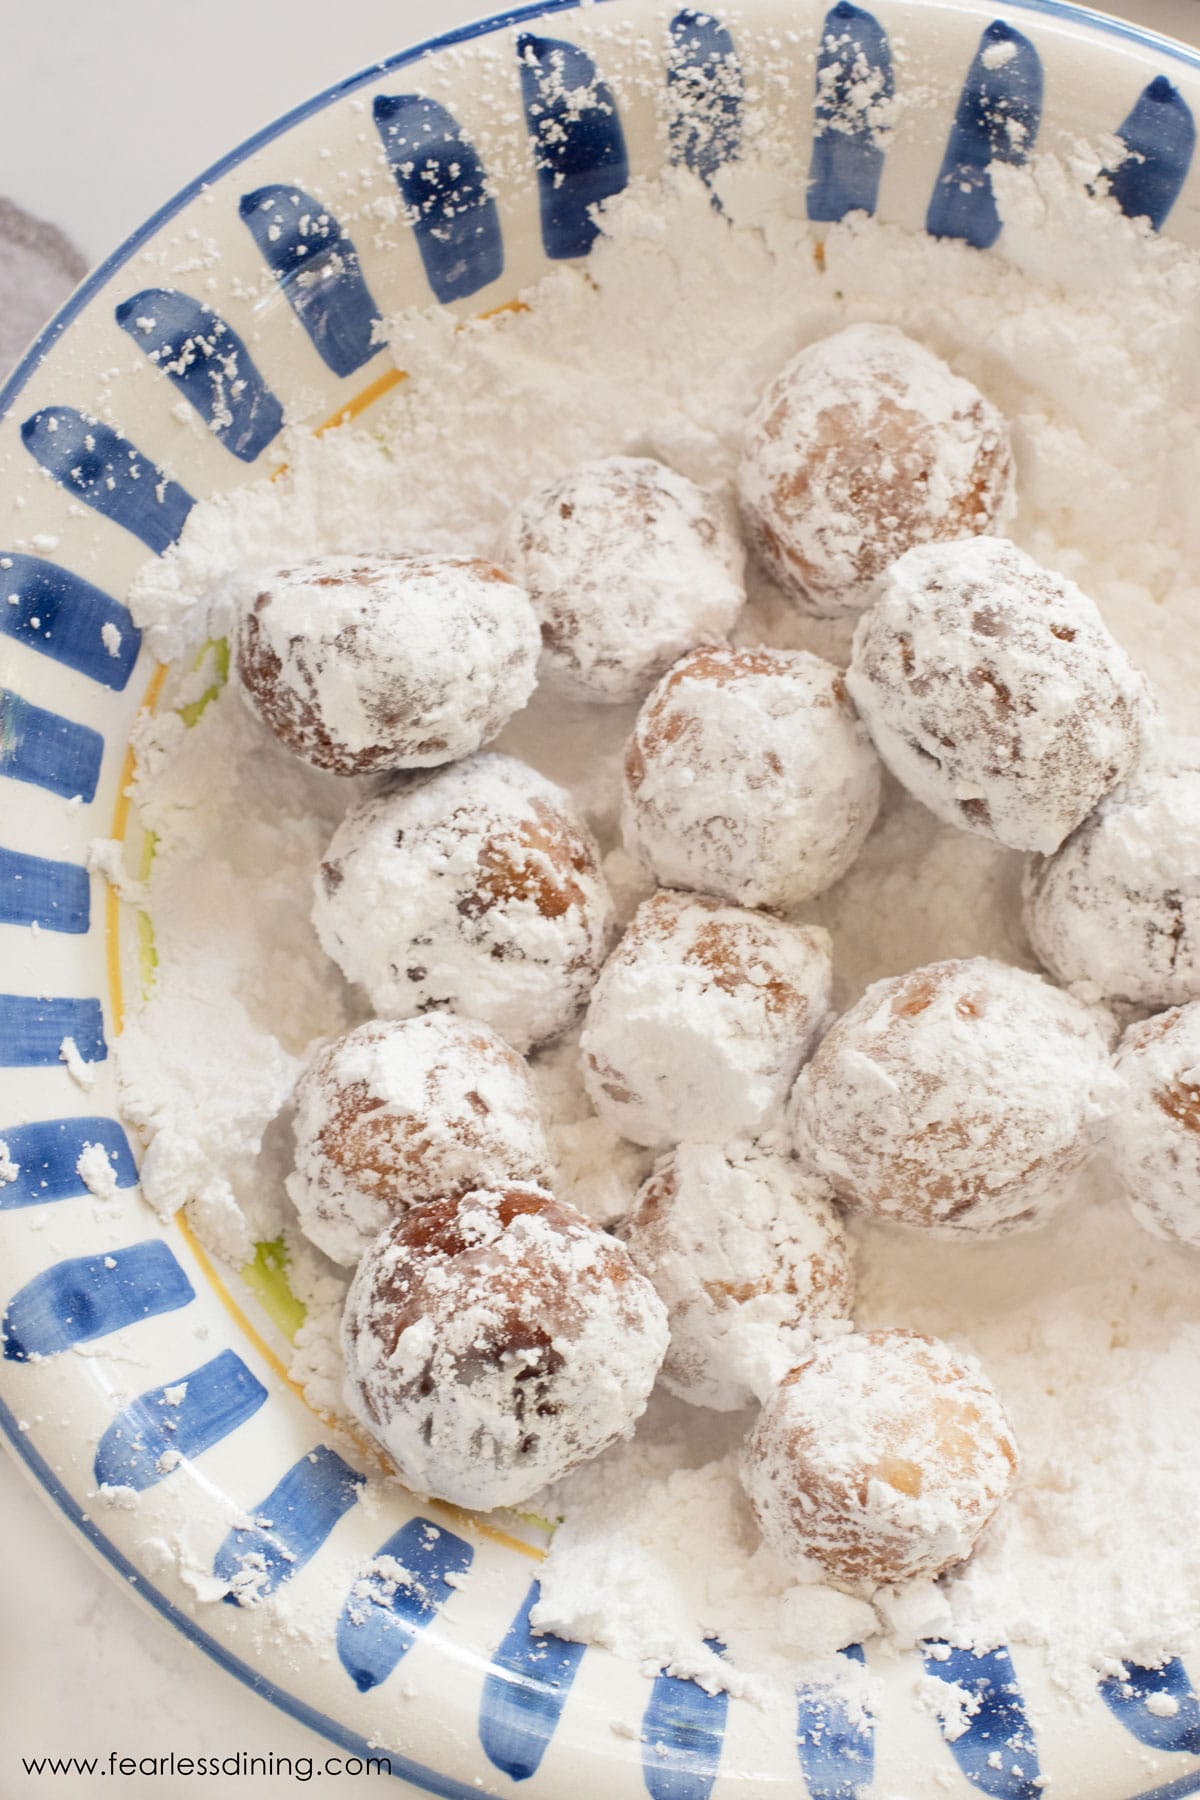 A large bowl filled with powdered sugar. Donut holes are in the sugar.